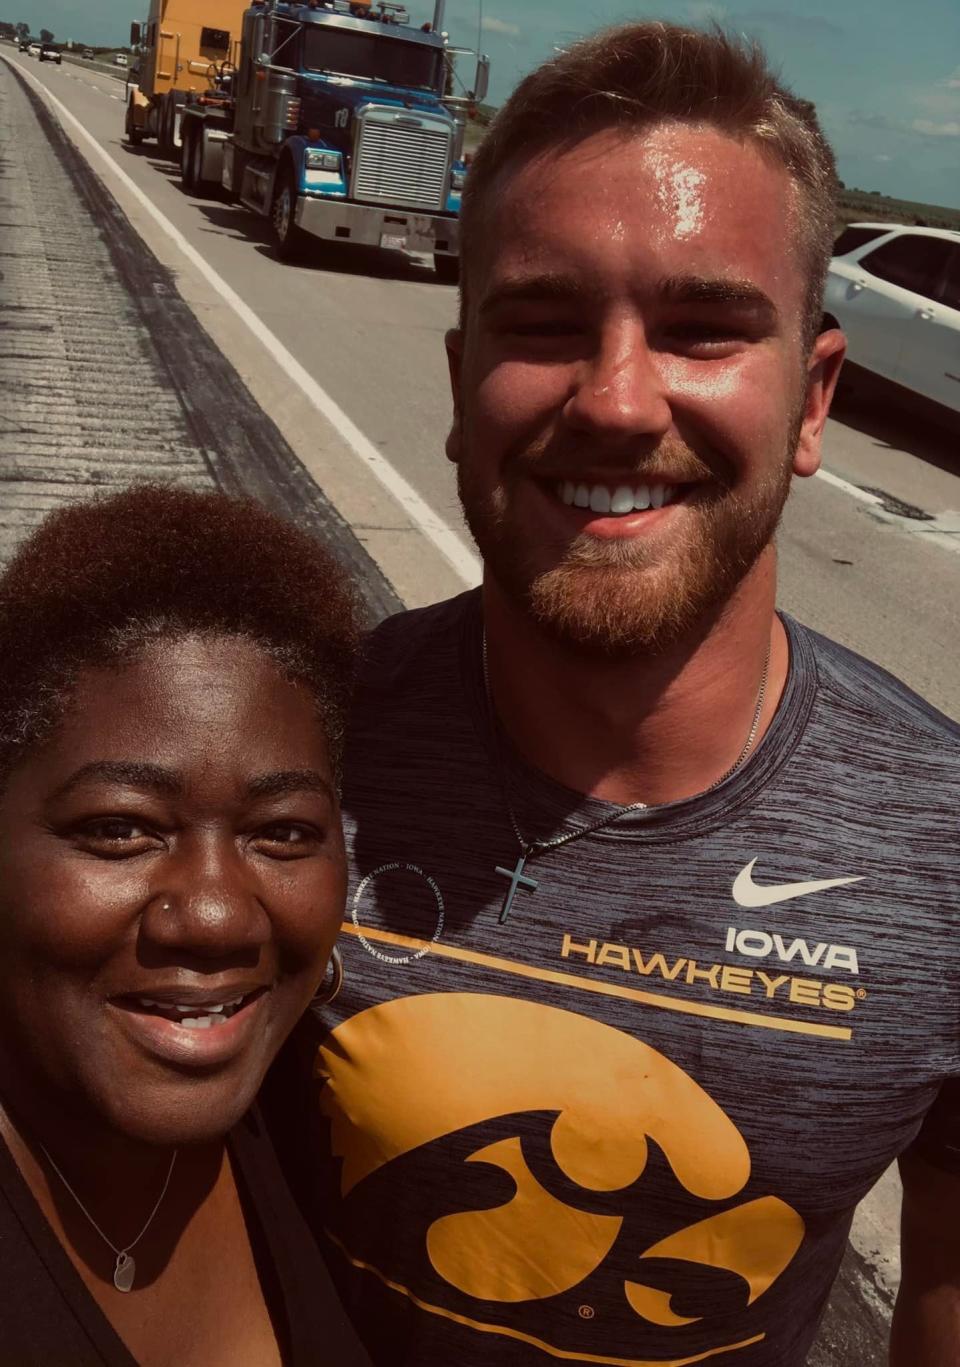 Iowa Hawkeyes linebacker Zach Twedt helped Nebraska resident Tina Gunn and her two sons change a flat tire on their car in 2022 after the family got stuck on the side Interstate 35 in Iowa.